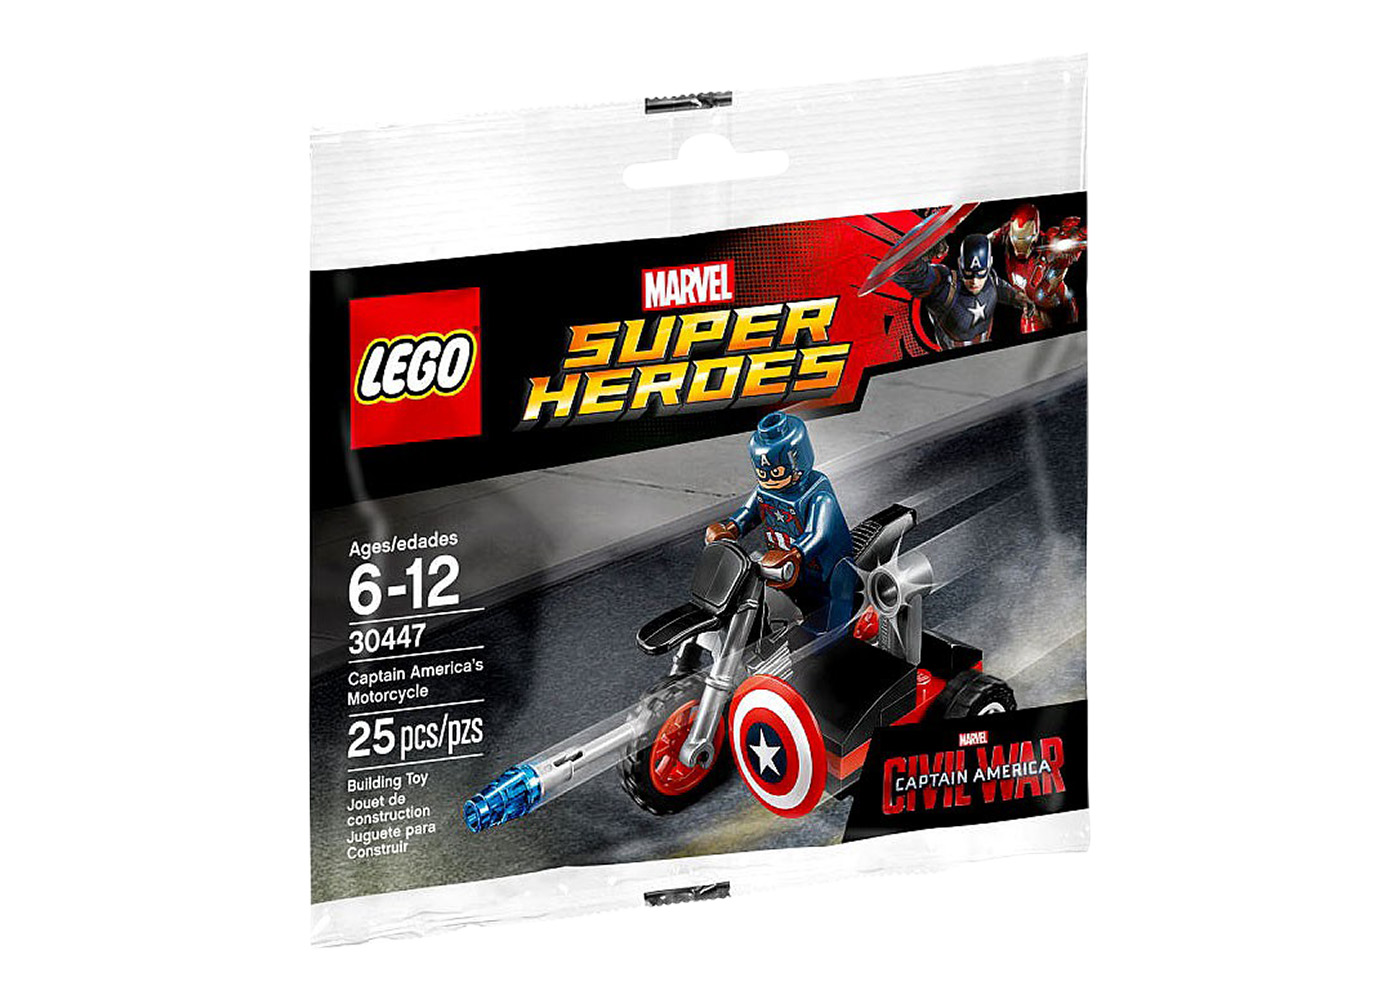 LEGO Marvel Avengers Captain America Outriders Attack Set 76123 - US